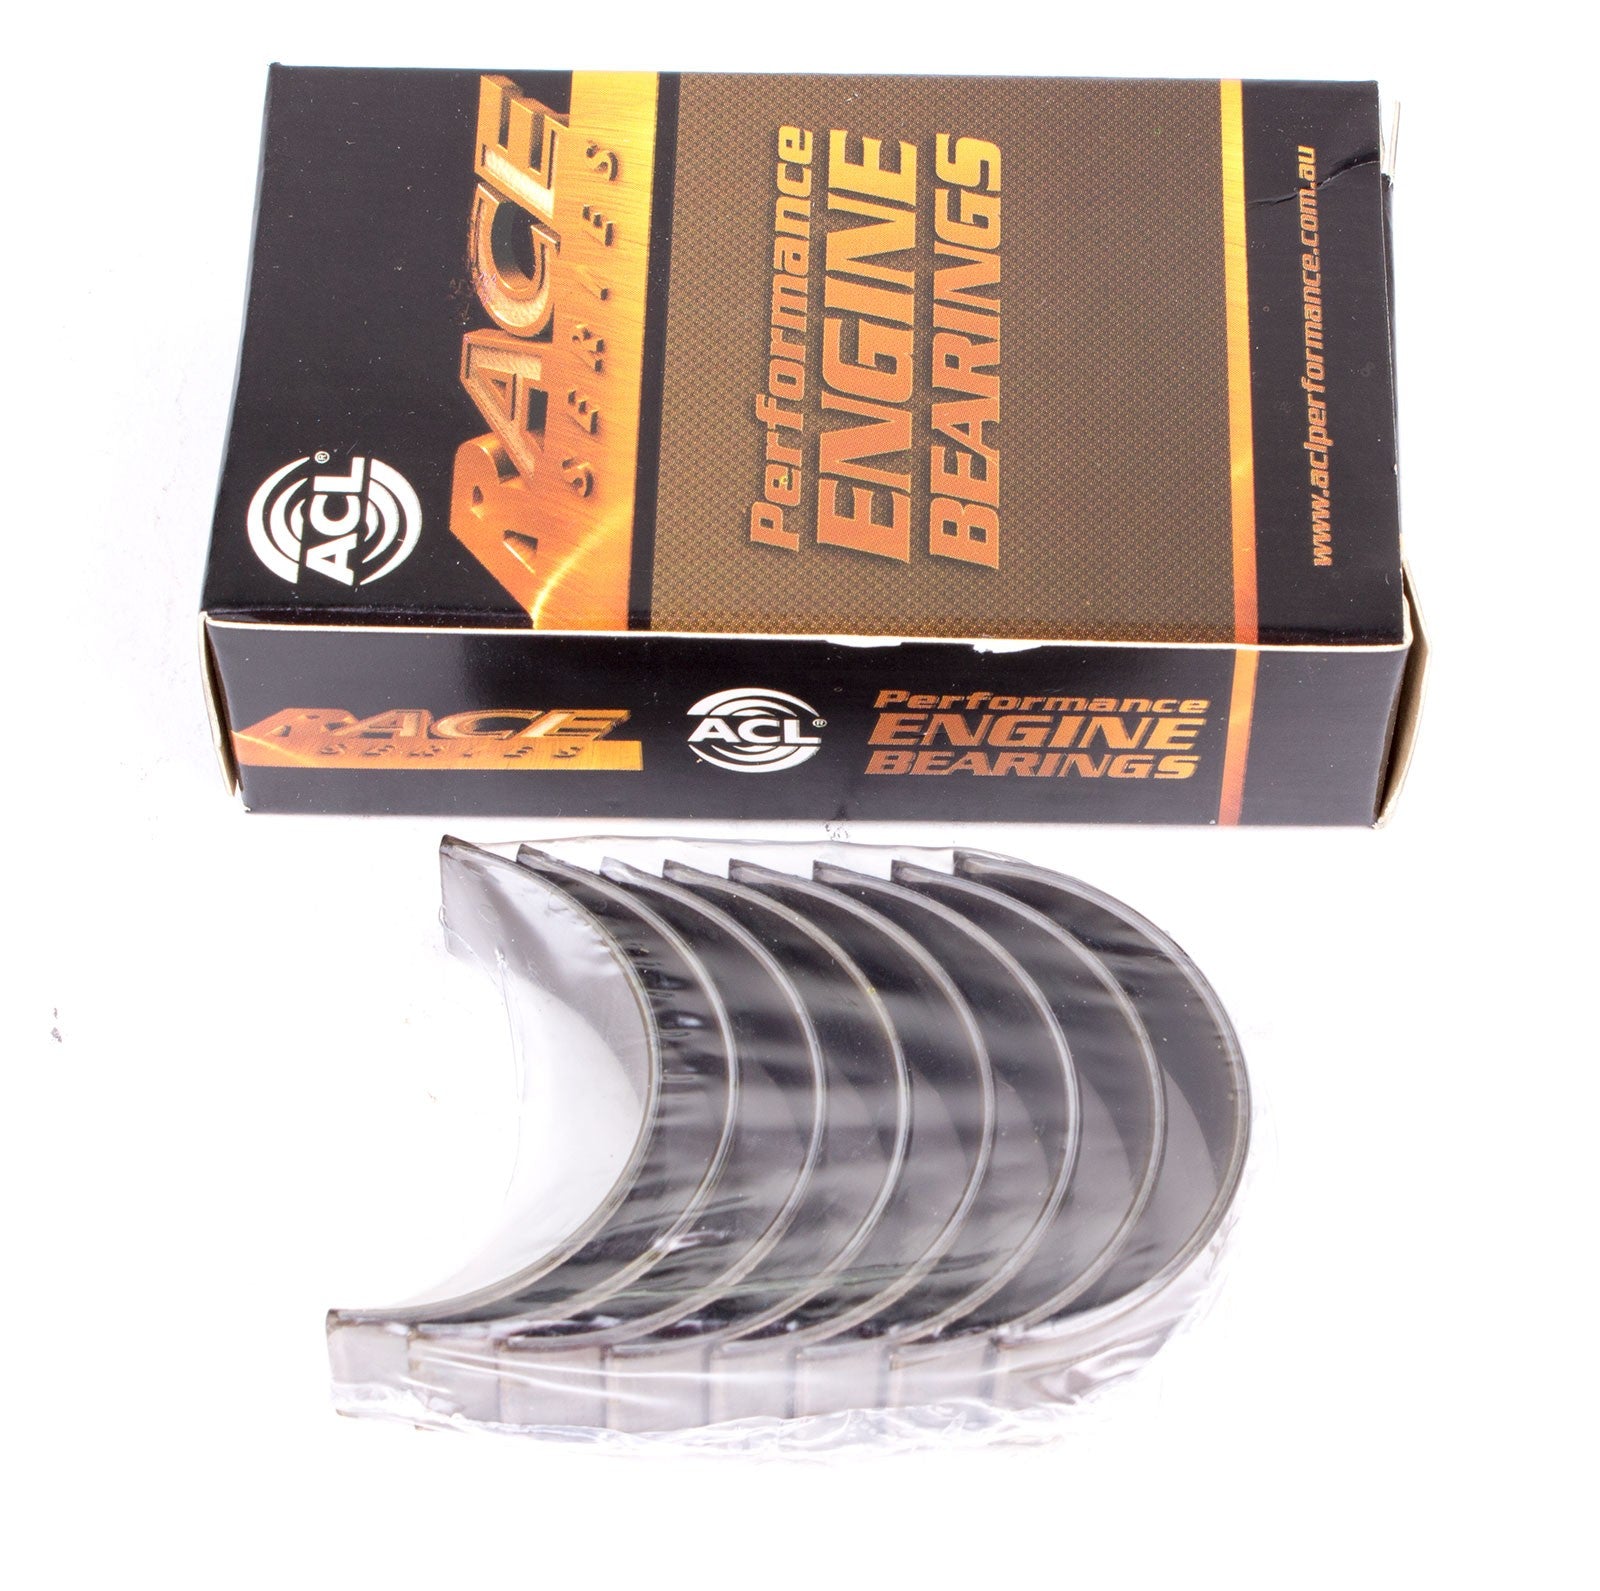 ACL 4M7330H-.025 Main bearing set (ACL Race Series) Photo-0 